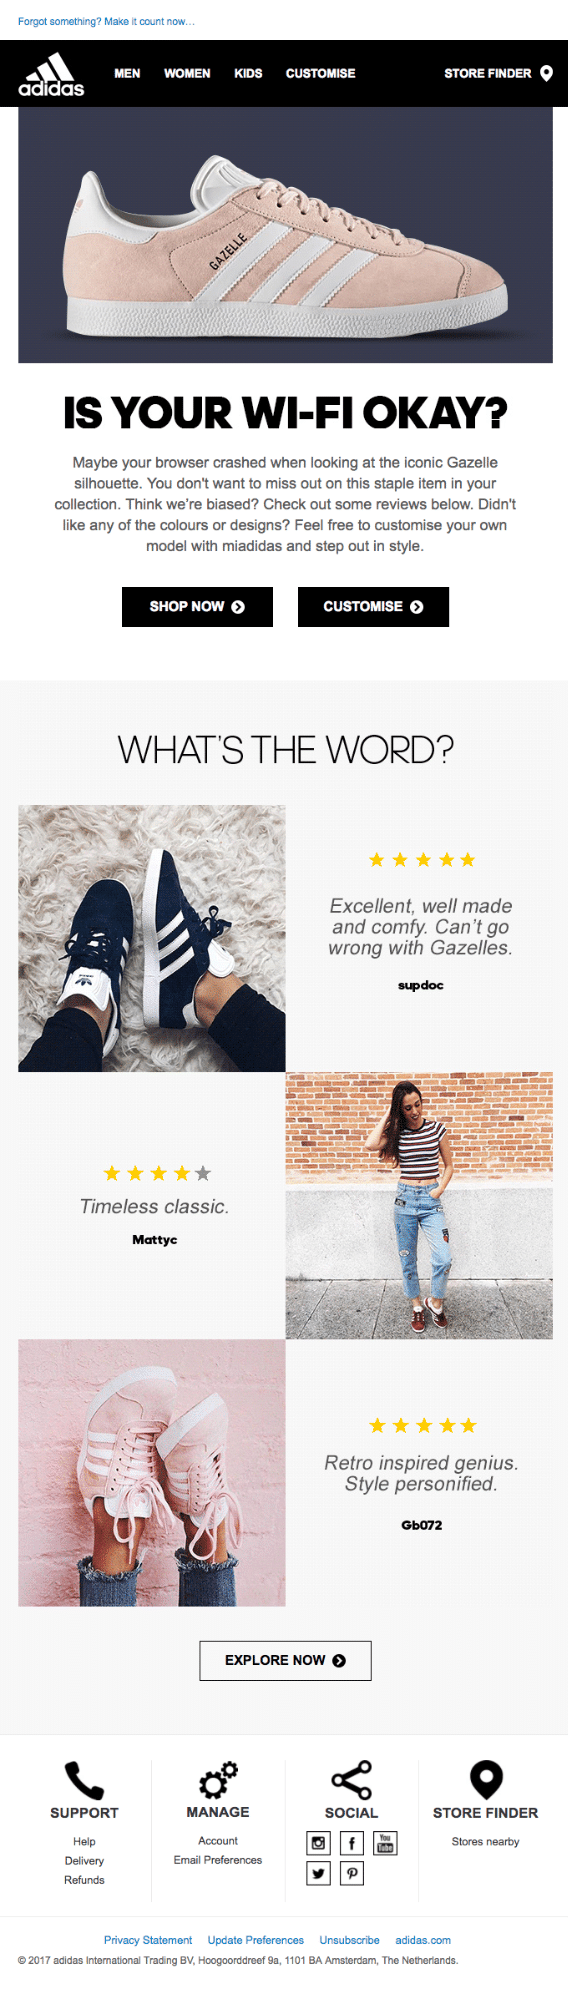 Adidas shows how you can use UGC reviews in your automated emails.